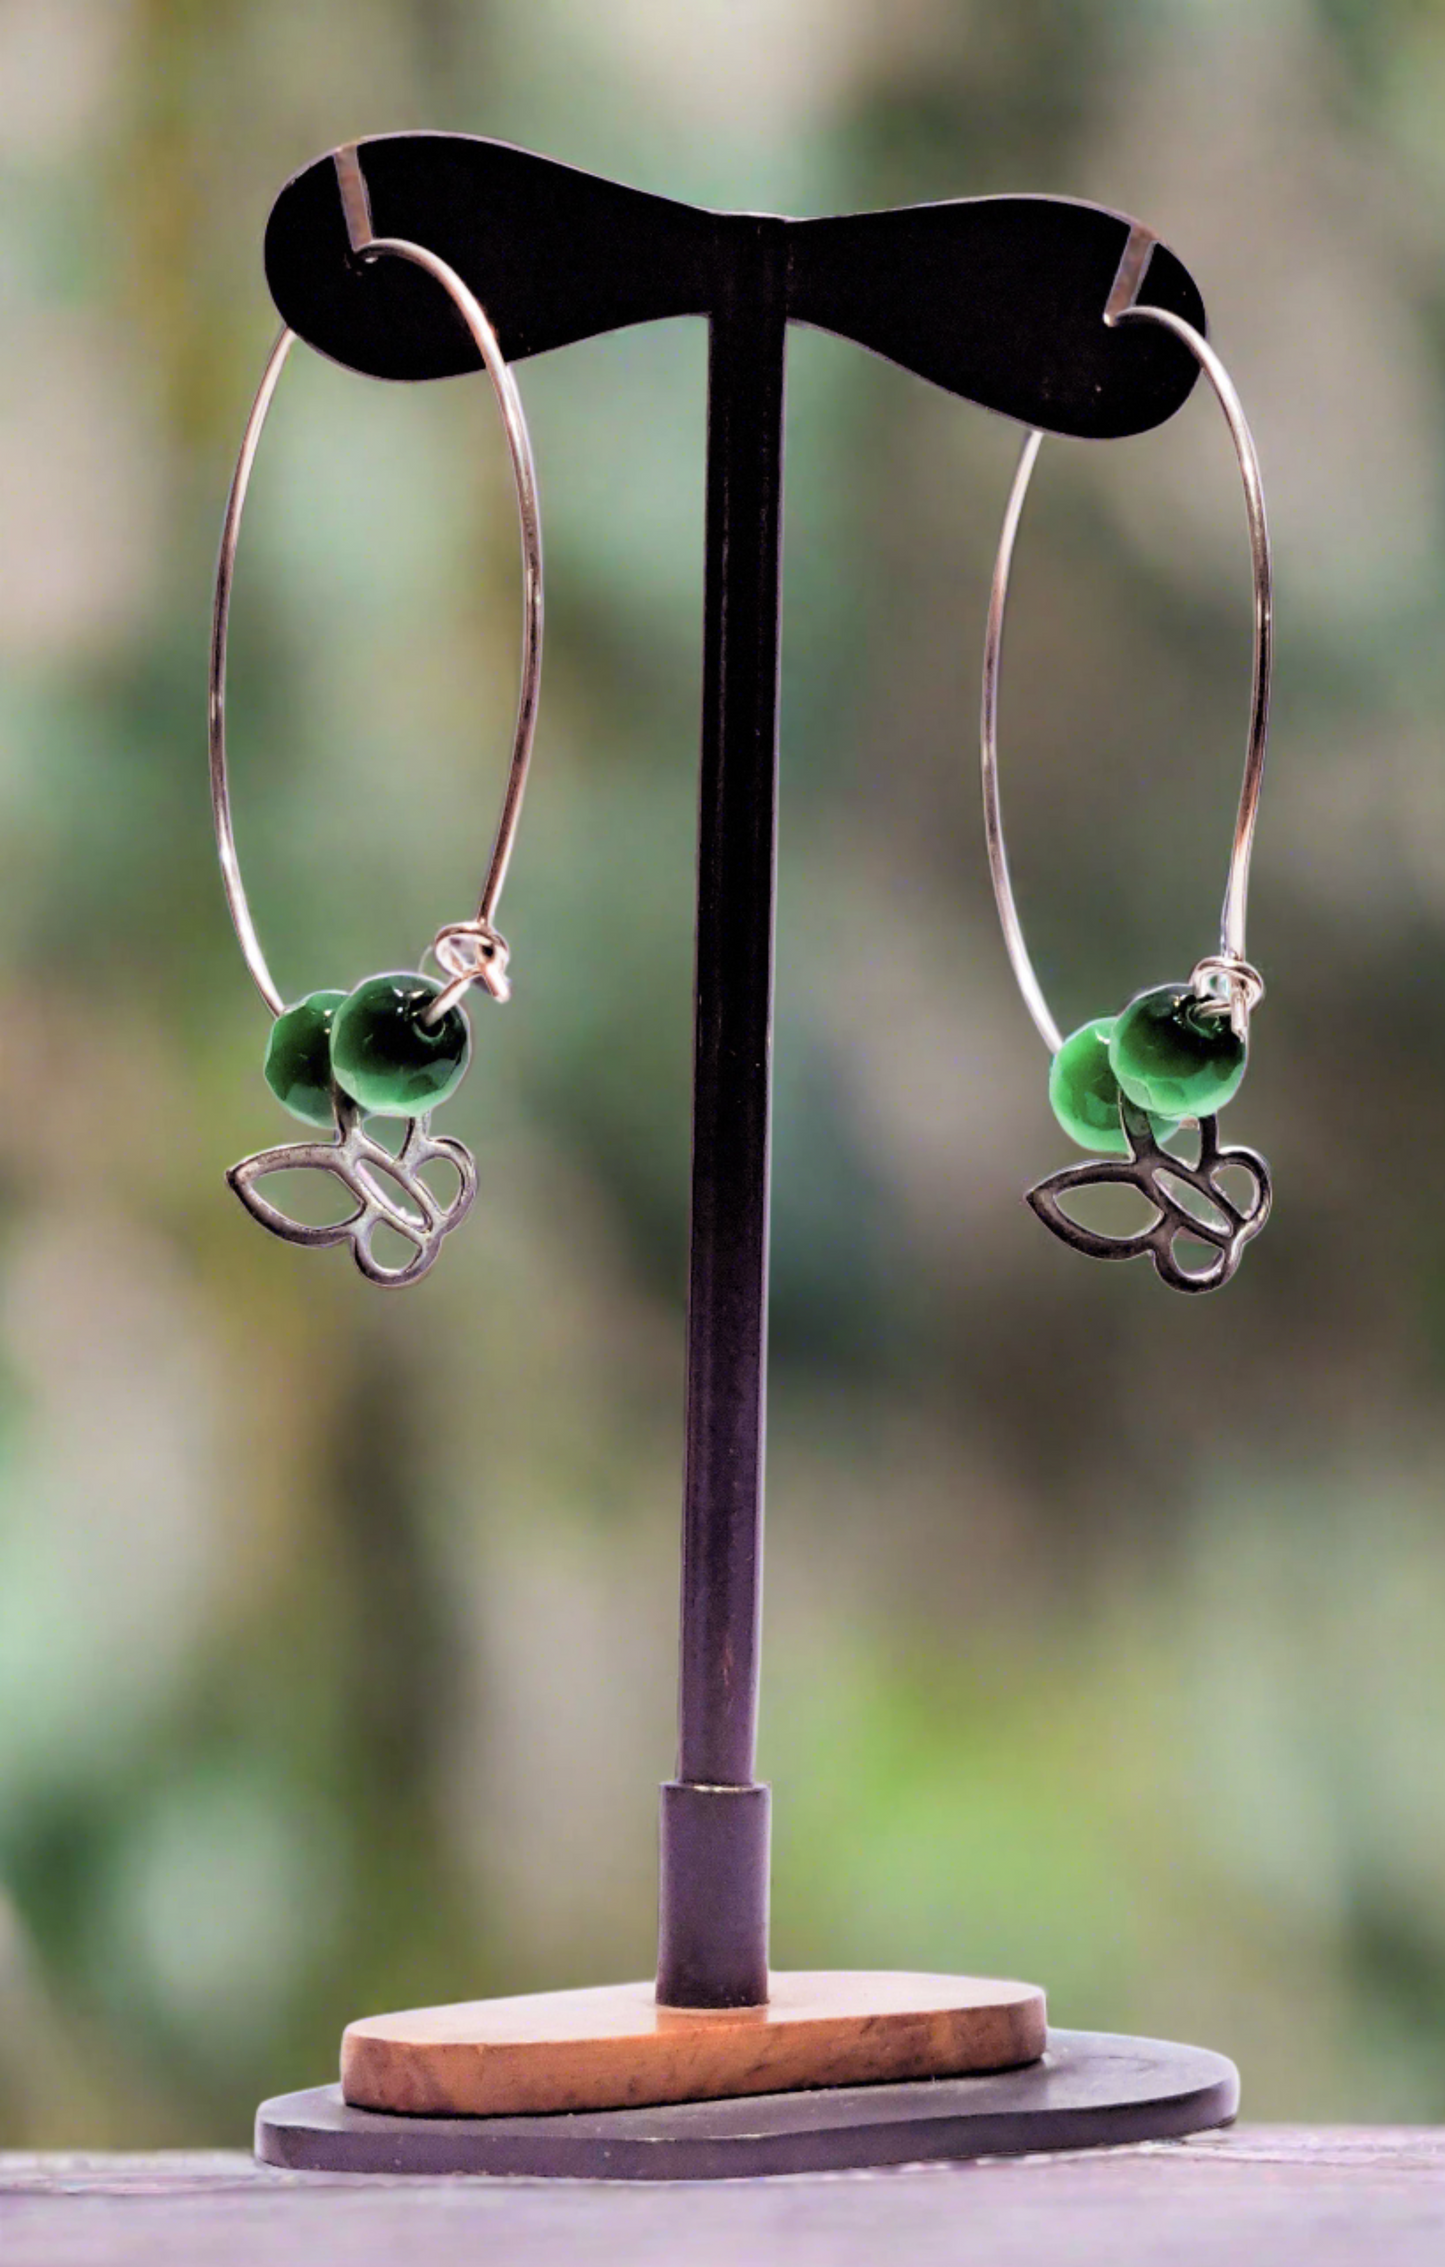 Handmade sterling silver hoops with grren beads and butterfies